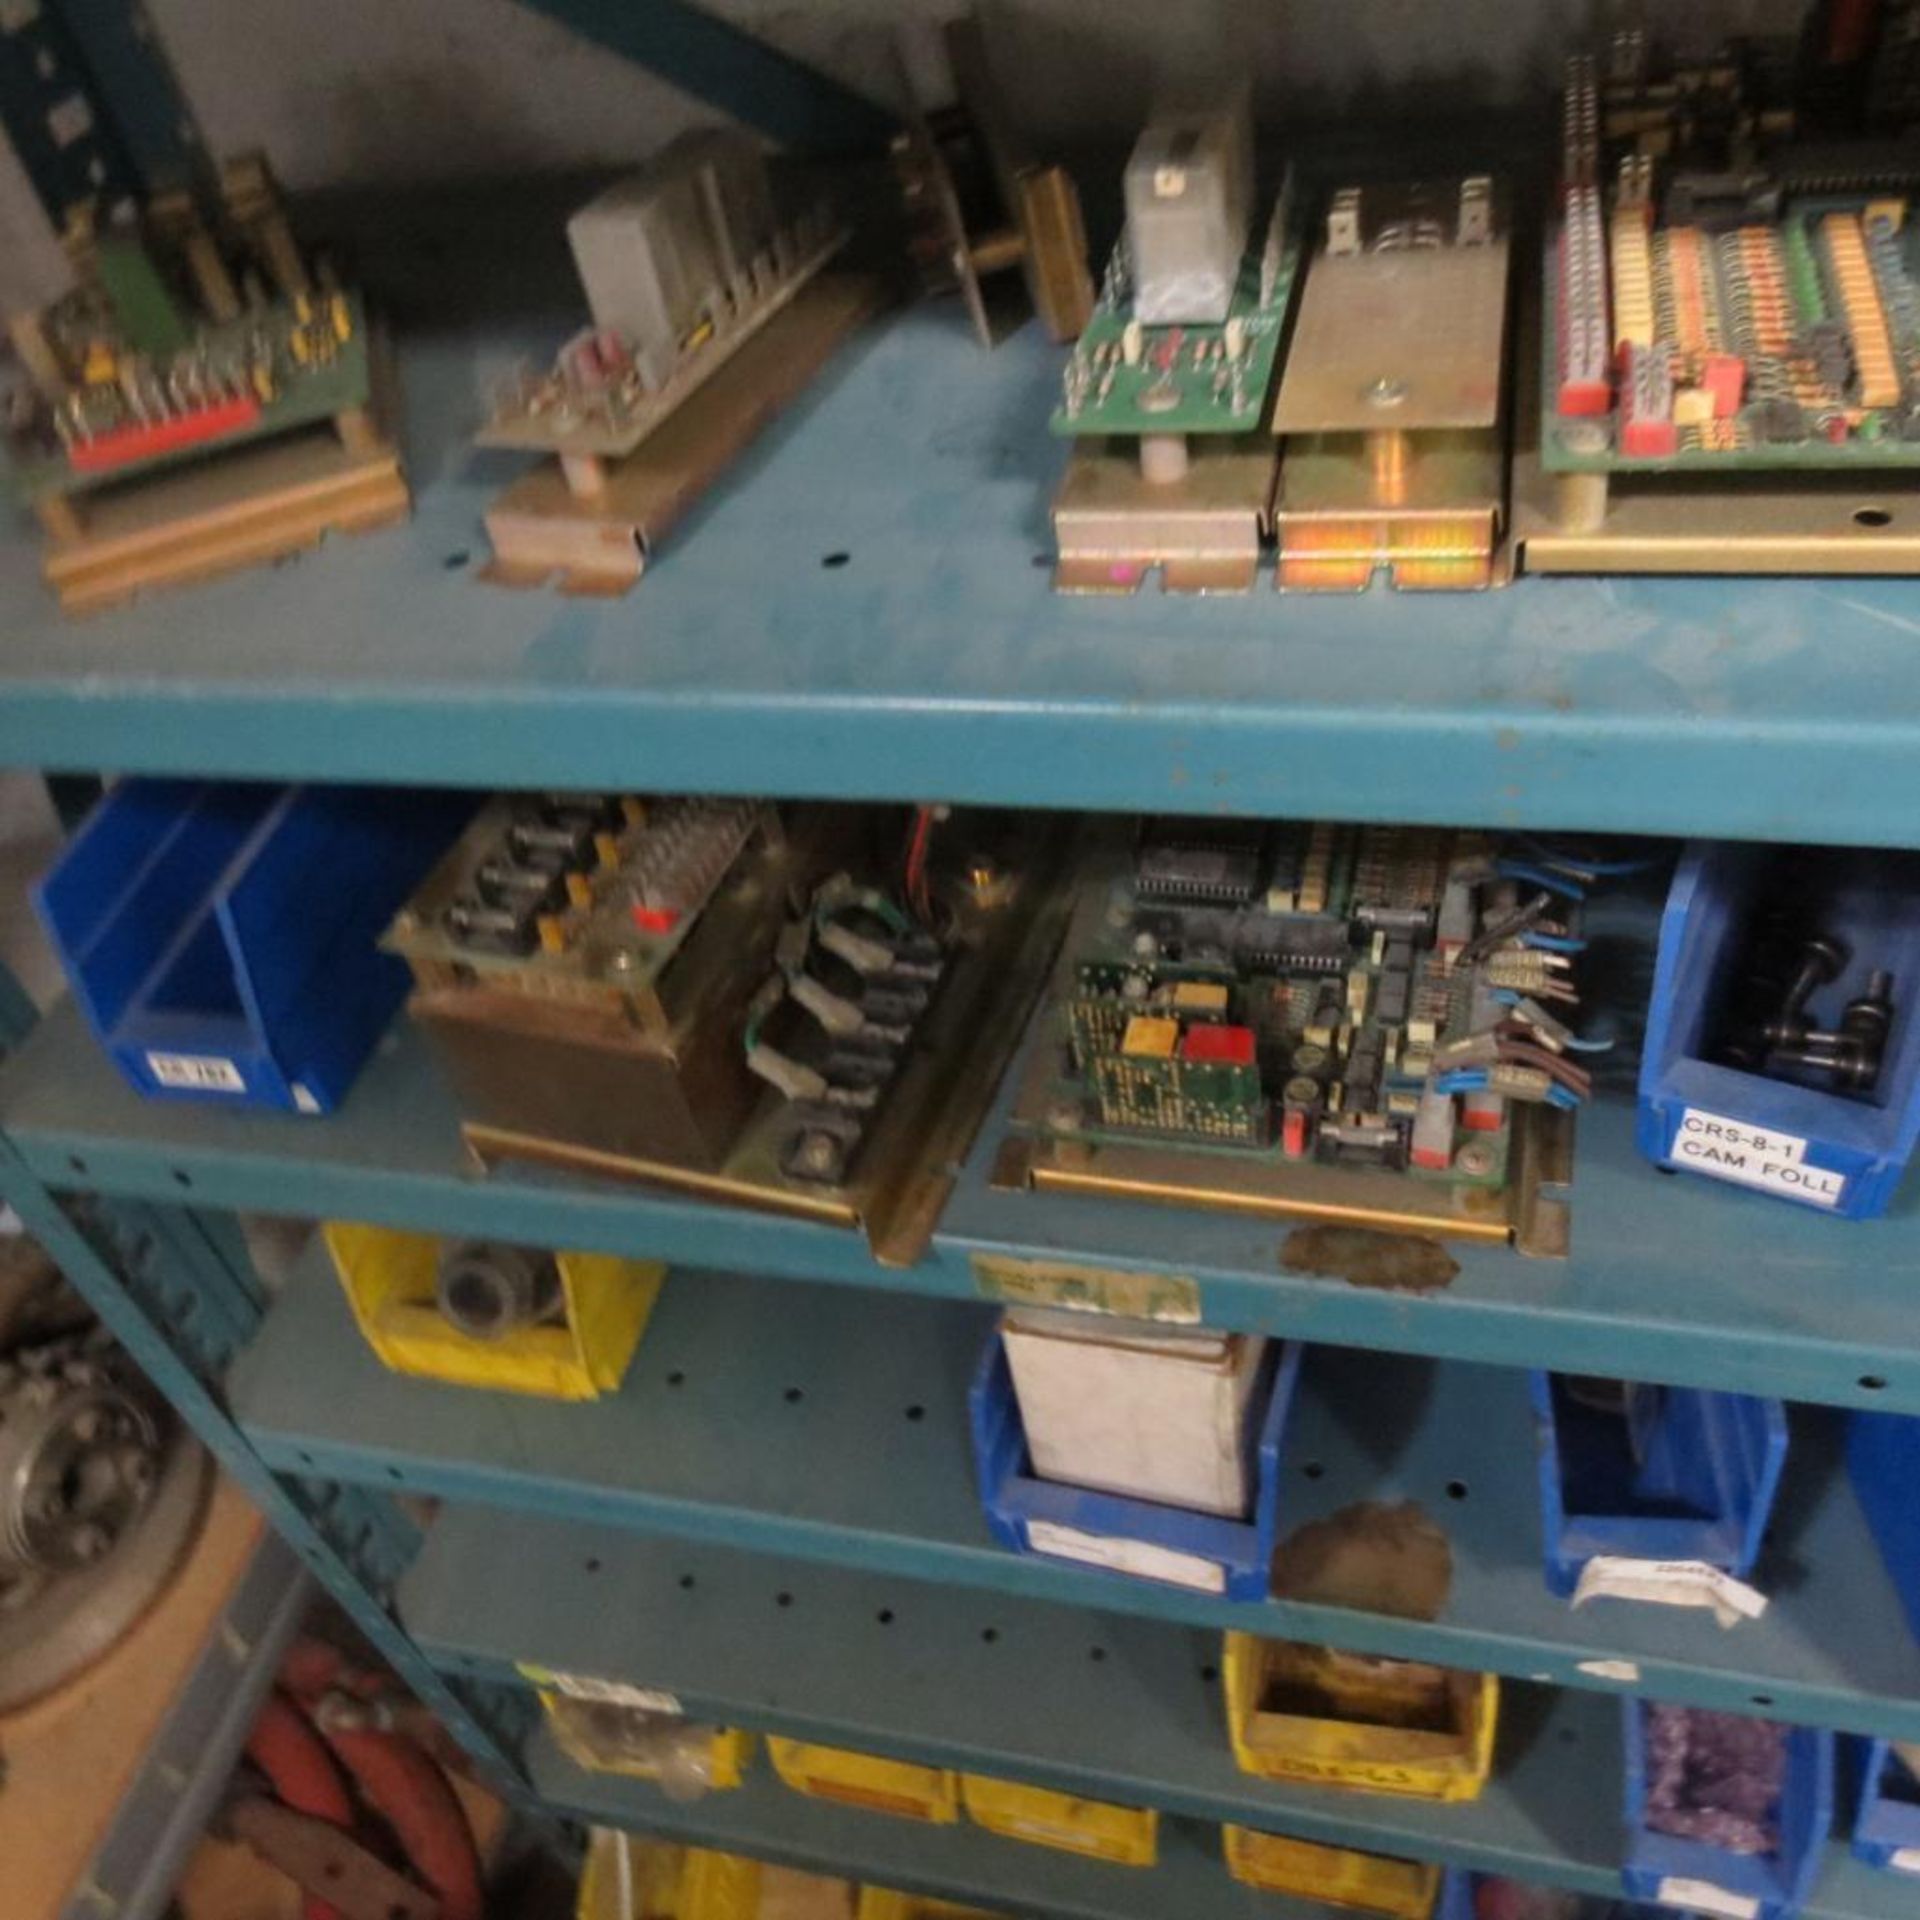 Parts Room Consisting of Gears, Electric Boards, Motors, AB Item, Filters, Motor Starters and Parts - Image 11 of 42